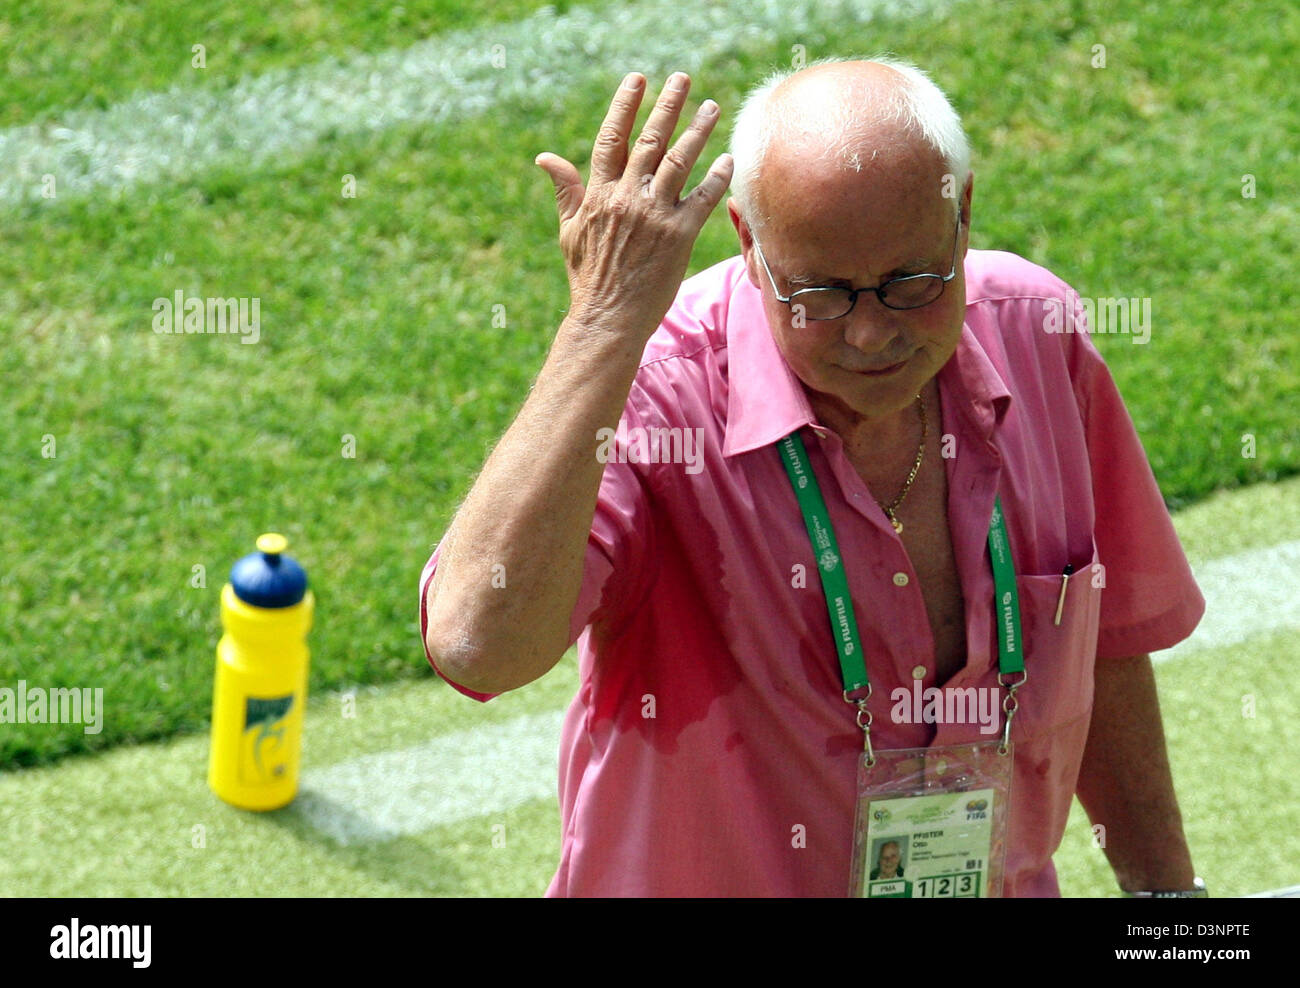 German coach Otto Pfister from Togo gestures on the sideline during the group G match of 2006 FIFA World Cup between Togo and Switzerland in Dortmund, Germany, Monday, 19 June 2006. Photo: ROLF VENNENBERND +++ Mobile Services OUT +++ Please refer to FIFA's Terms and Conditions. Stock Photo